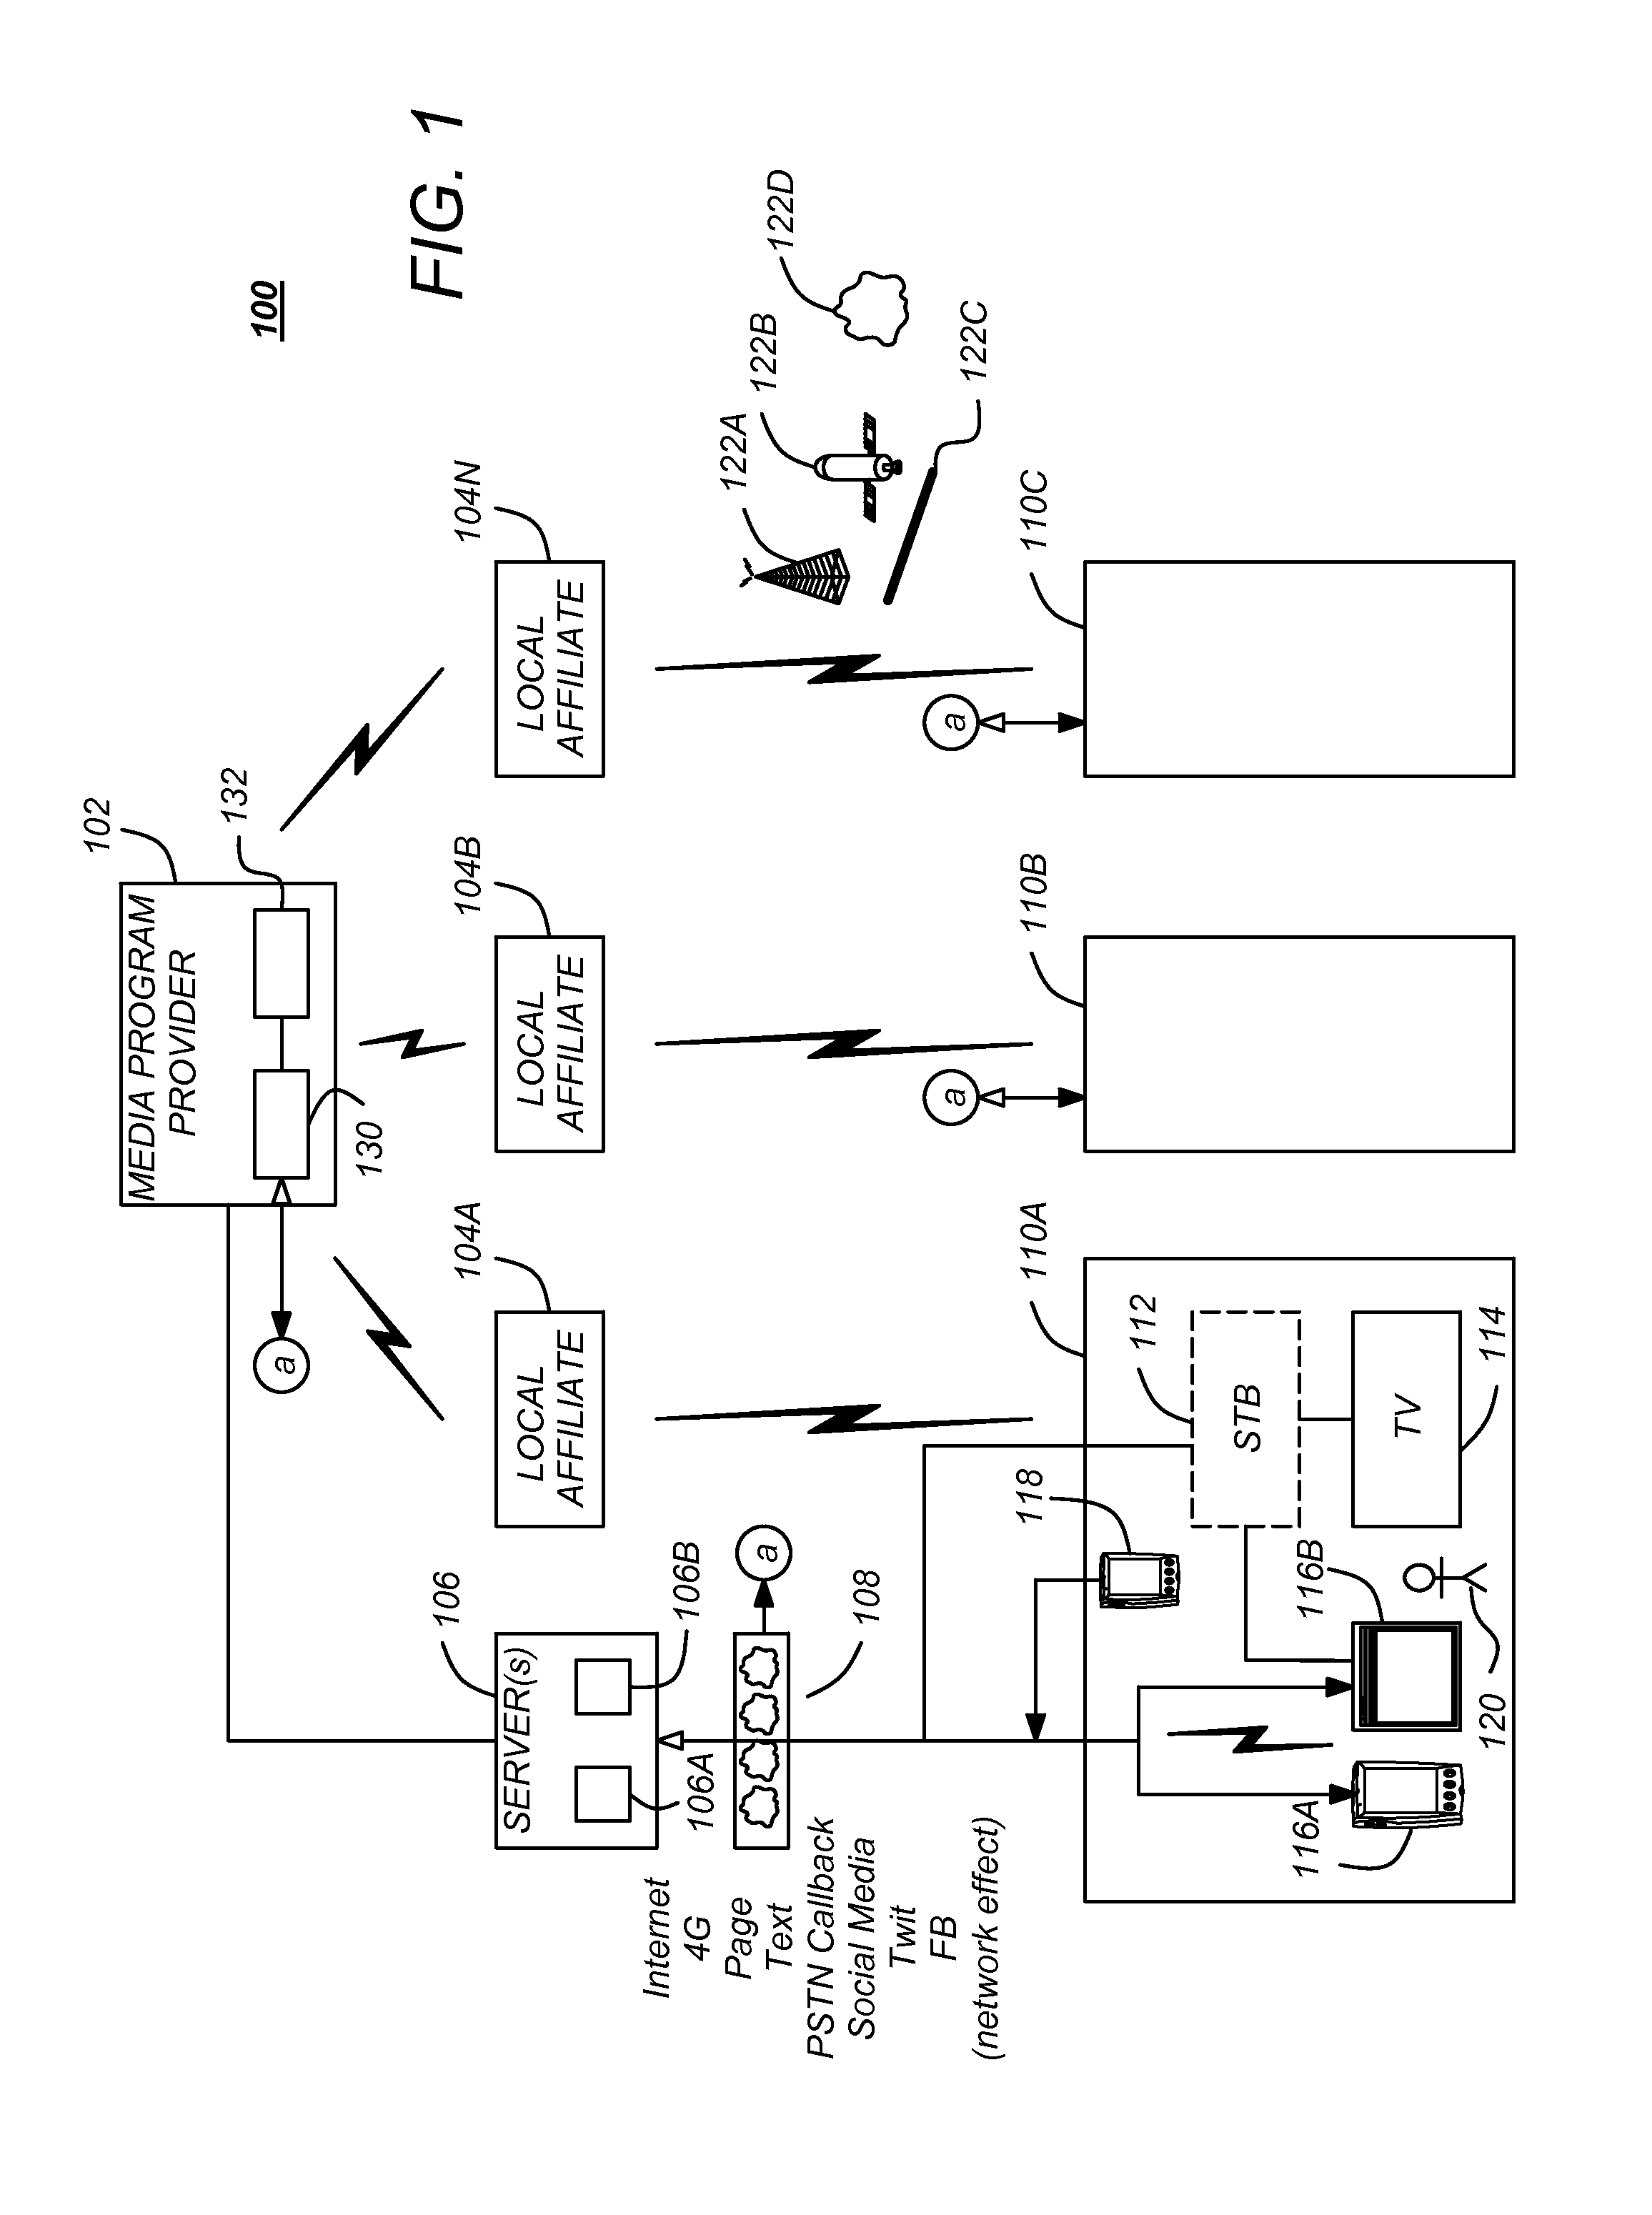 Method and apparatus for increasing viewership of broadcast programming